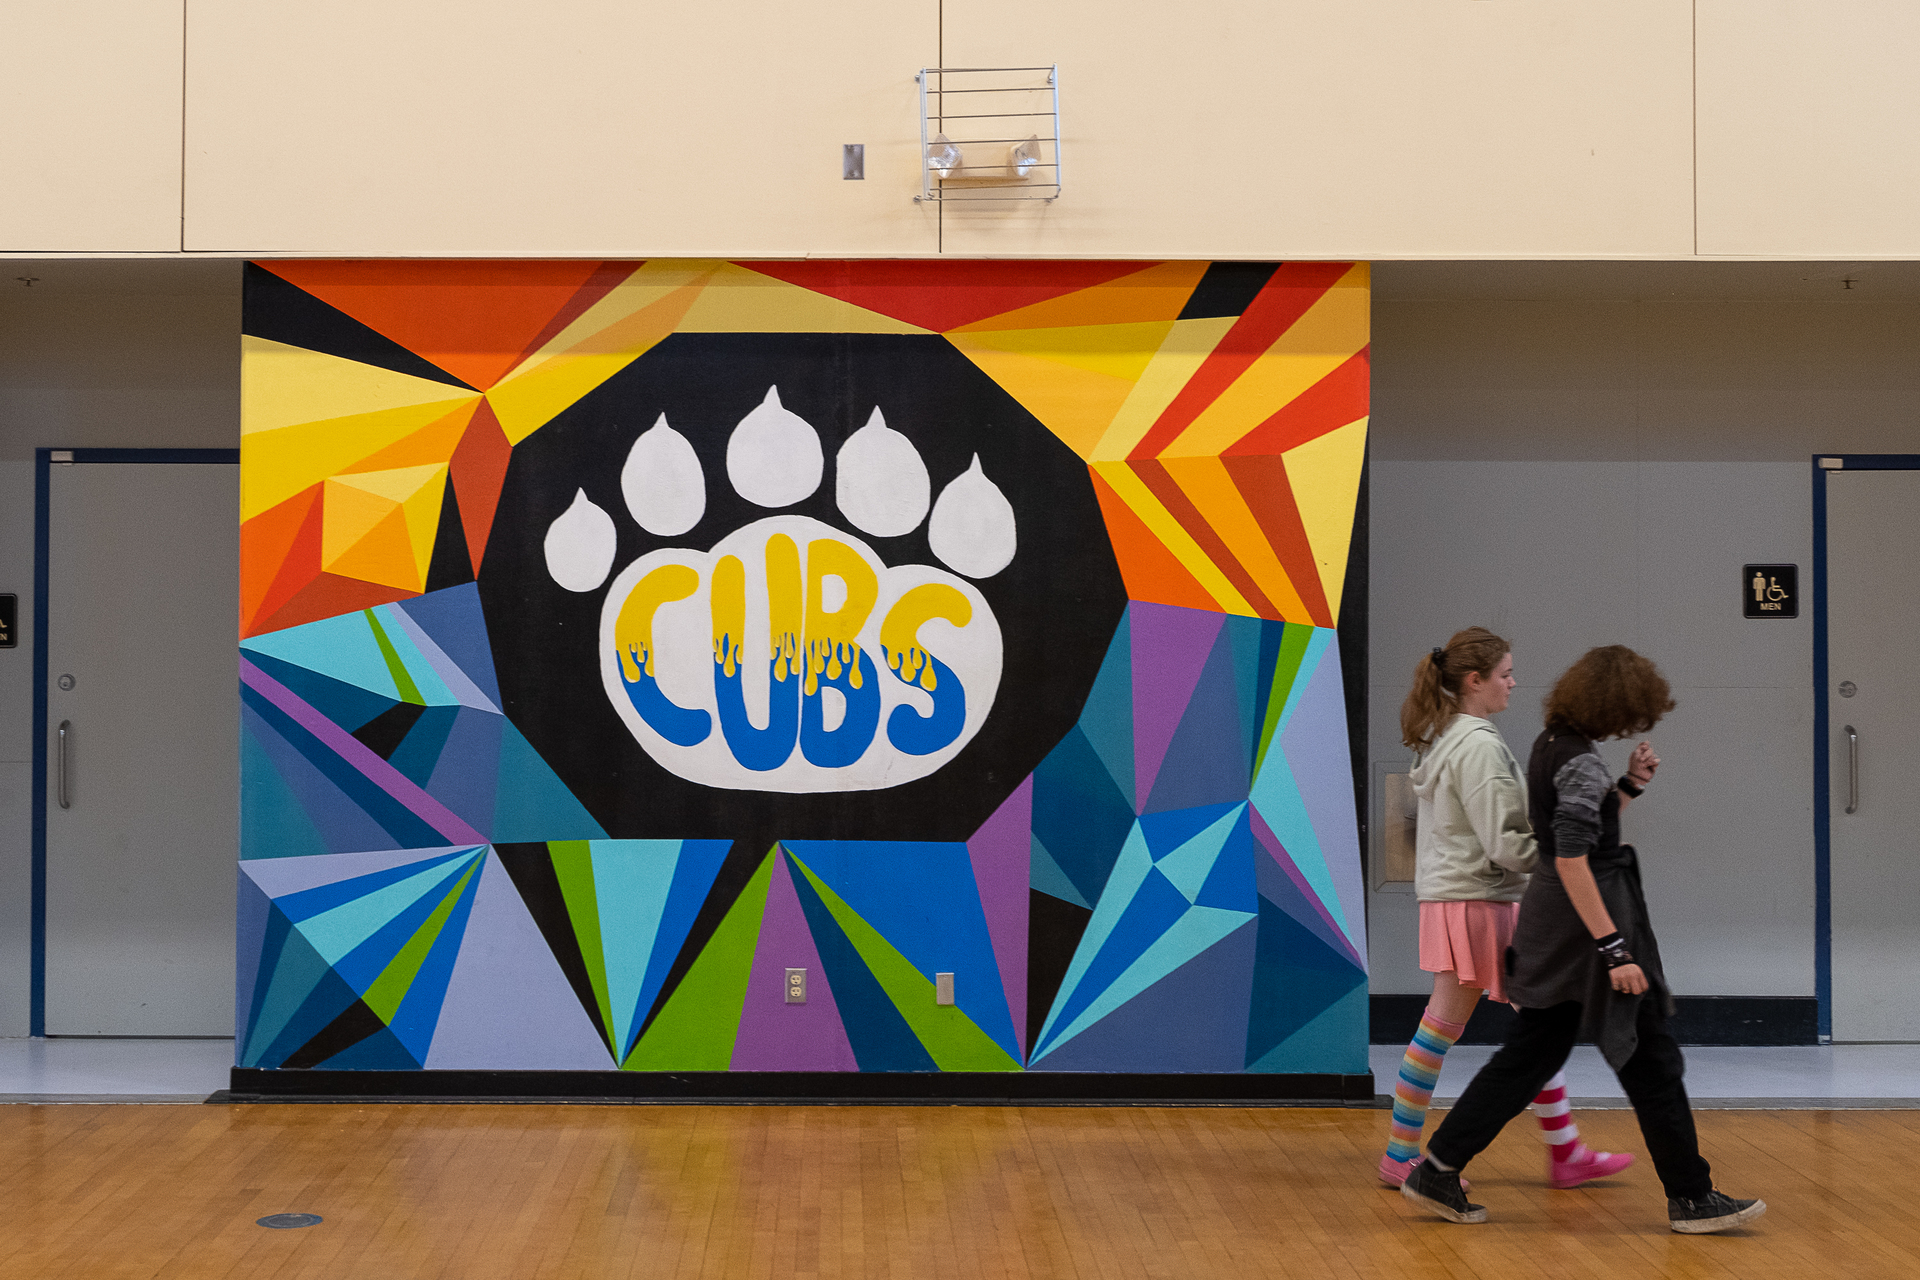 Colorful School Mural: Two students walk past a vividly painted mural with geometric shapes and the word "CUBS" in a school gymnasium, embodying school spirit and artistic flair.